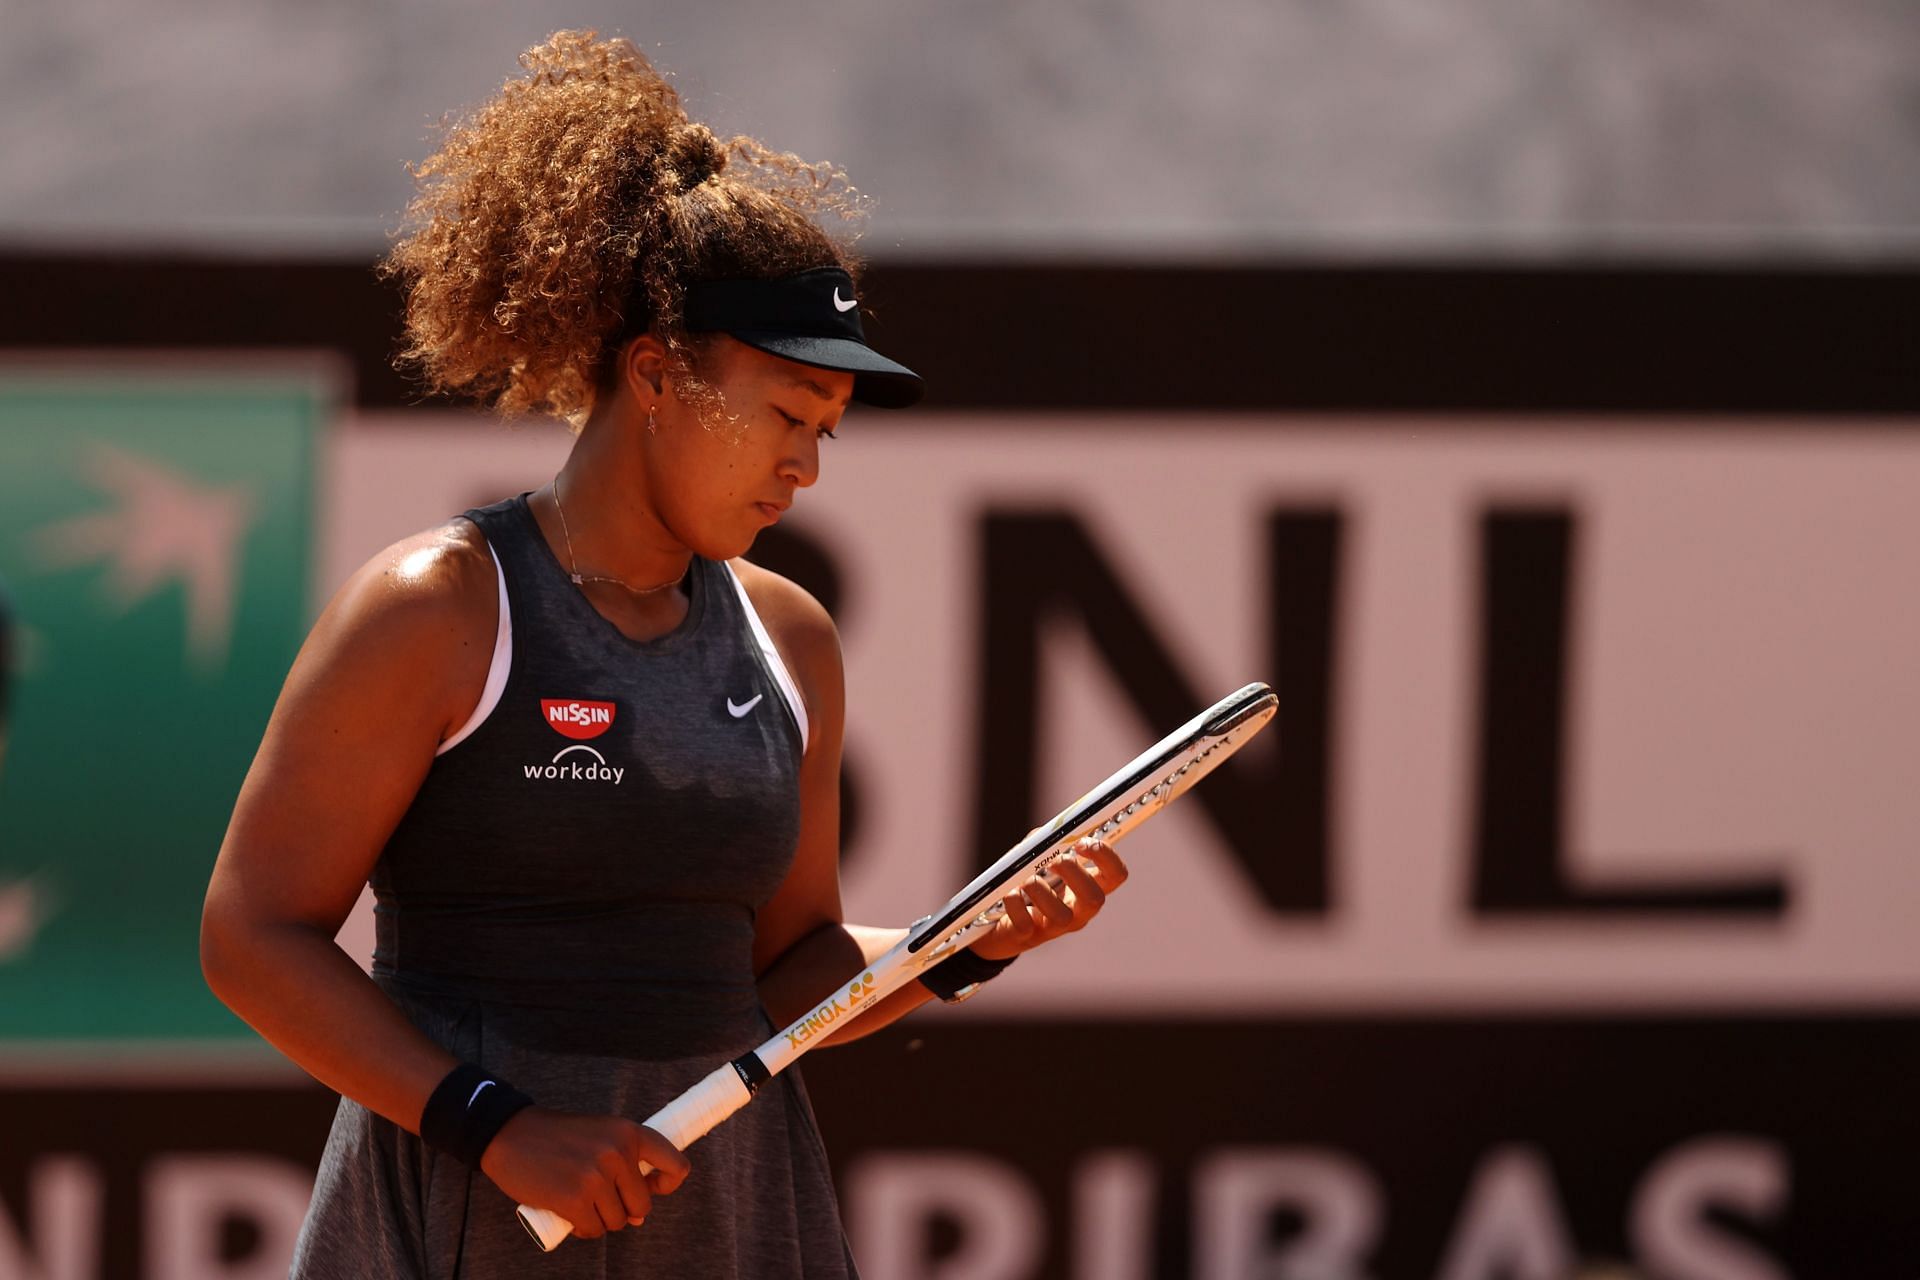 Naomi Osaka withdrew from the 2021 French Open after winning the first round.